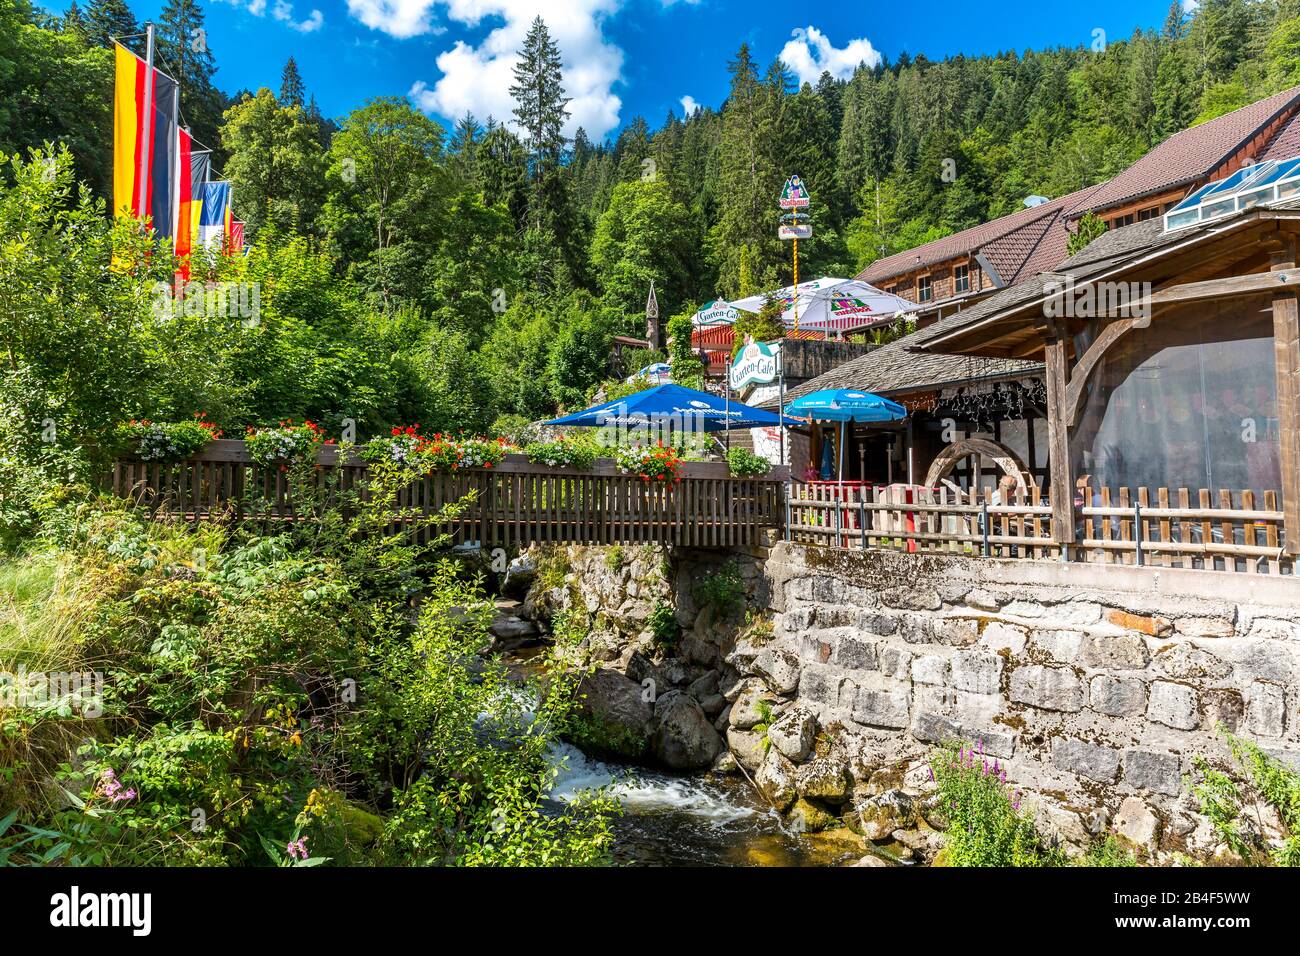 Garden cafe next to the entrance, Triberg Waterfalls, Triberg, Black Forest, Baden-Wurttemberg, Germany Stock Photo